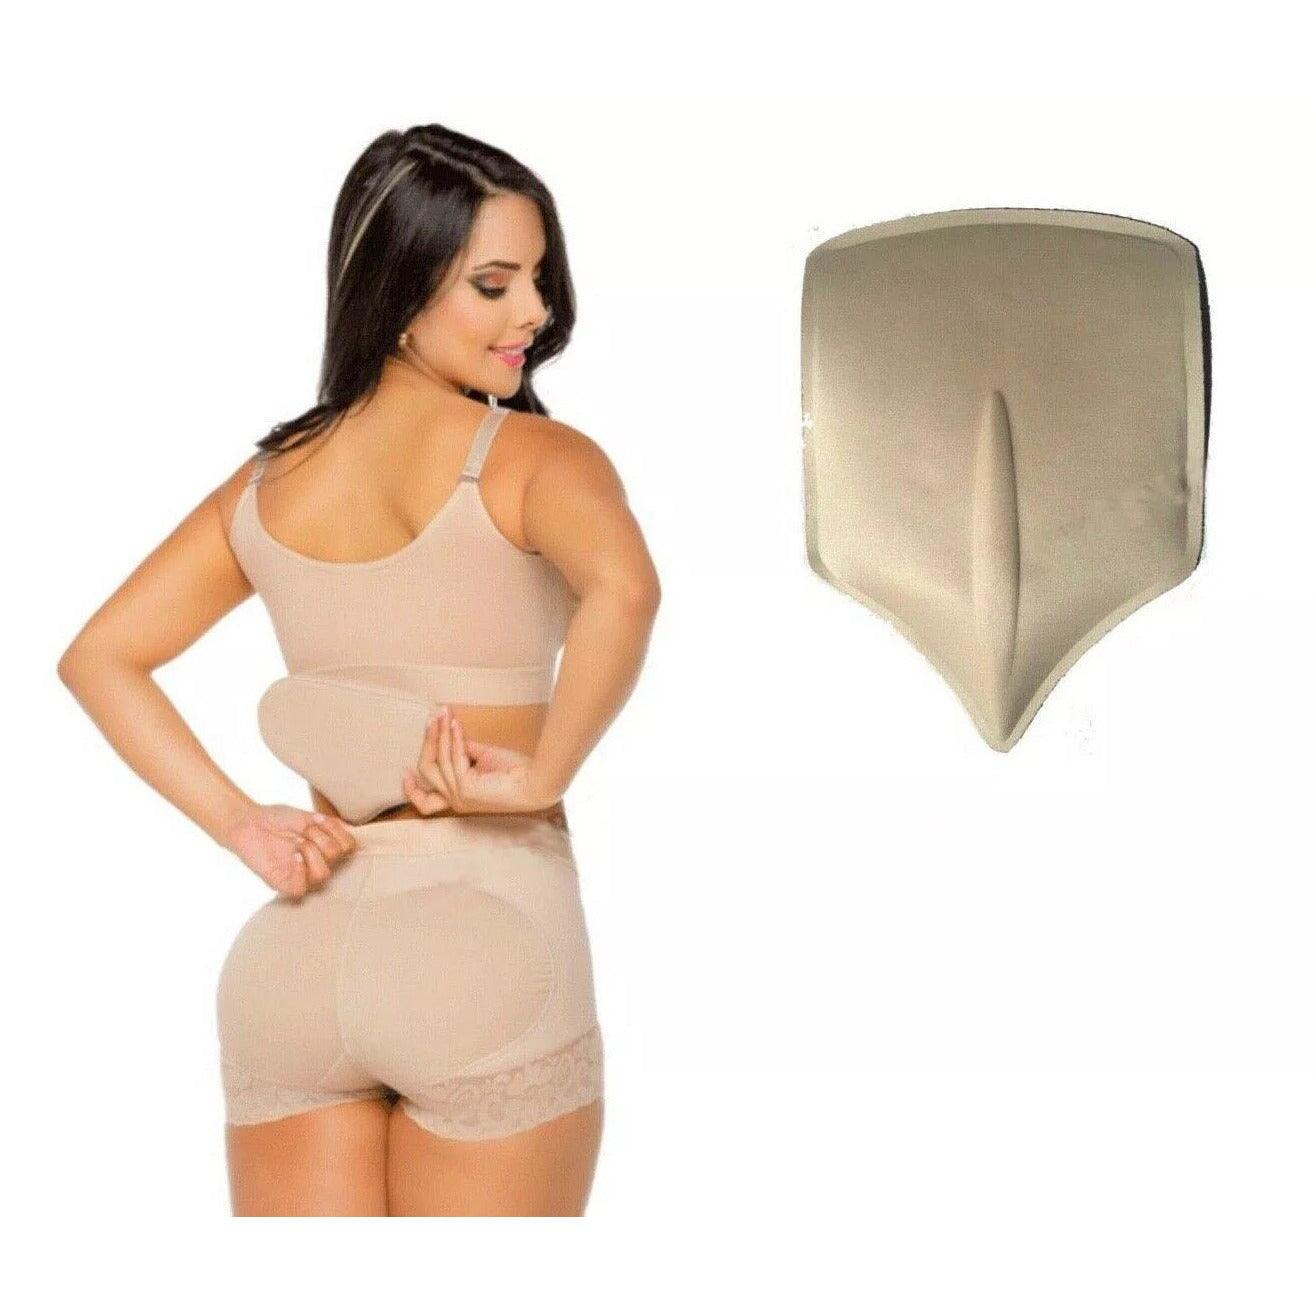 Lipo Foam Lumbar Molder BBL Back Board Liposuction Post Surgery, Case of 30 - The New You Recovery Kit